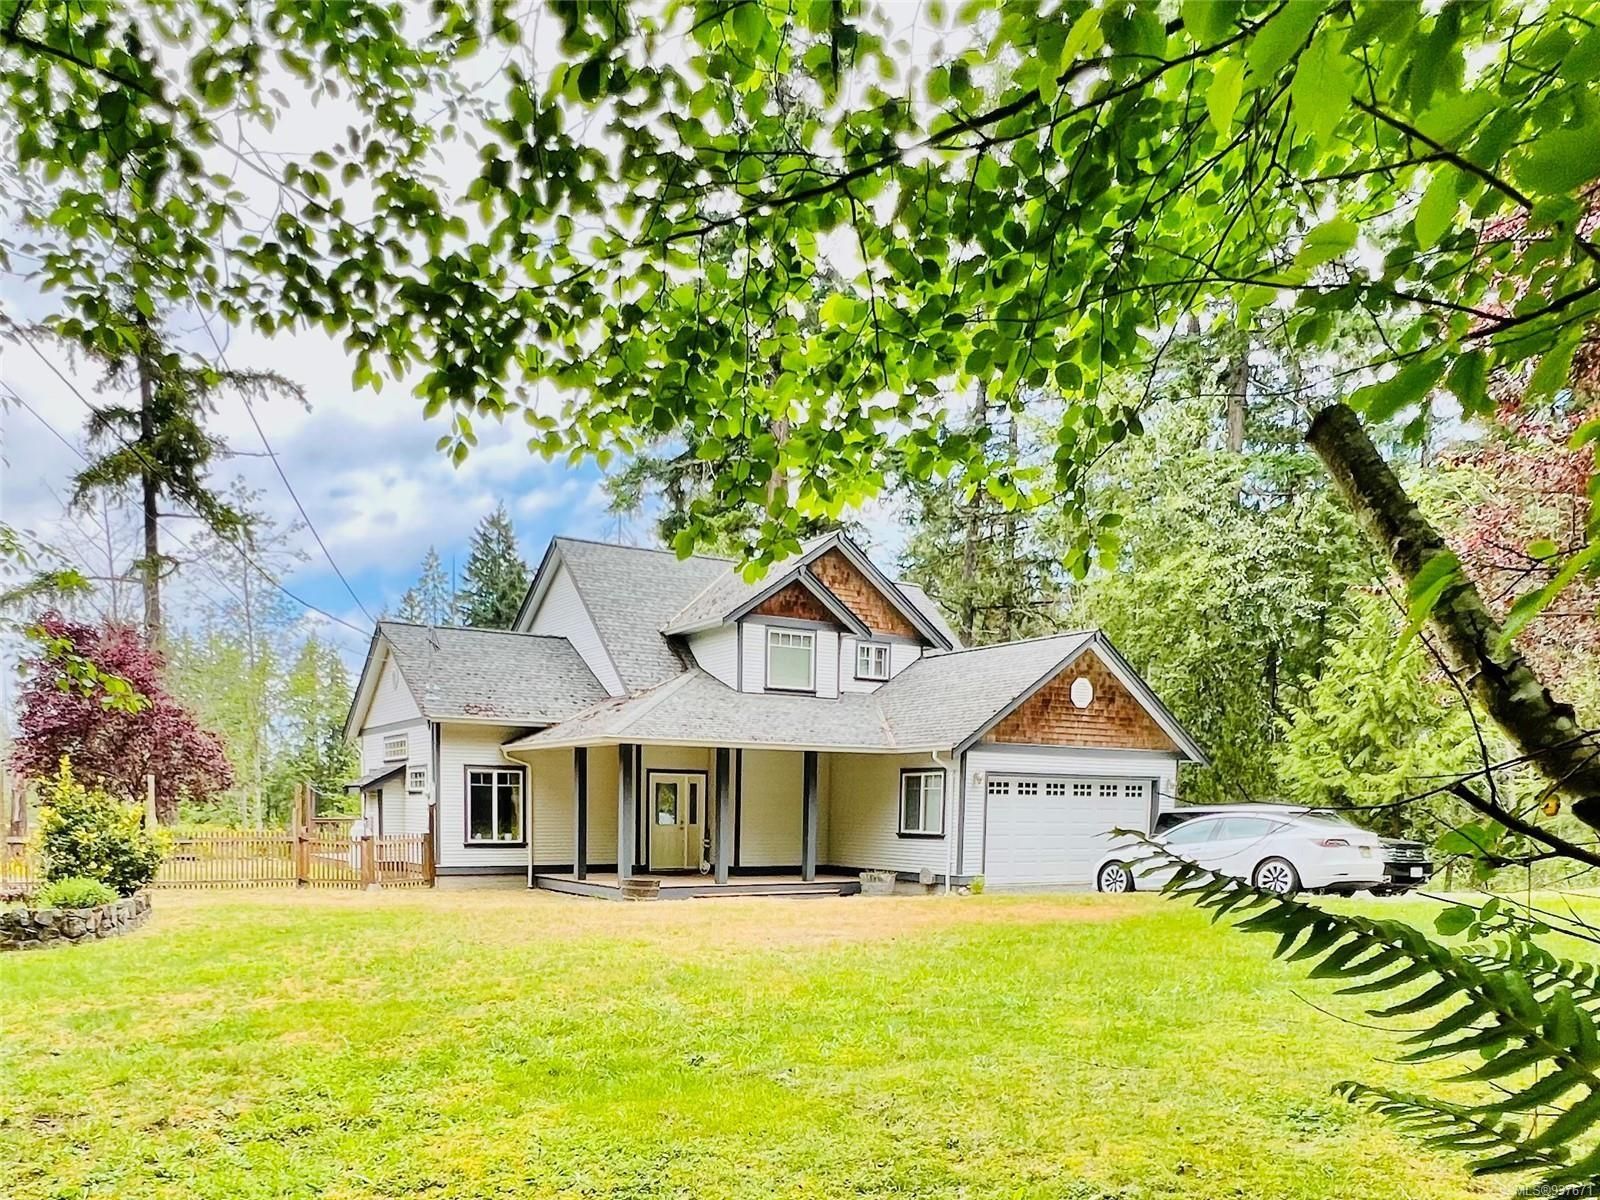 I have sold a property at 2155 Brandon Rd in Shawnigan Lake
